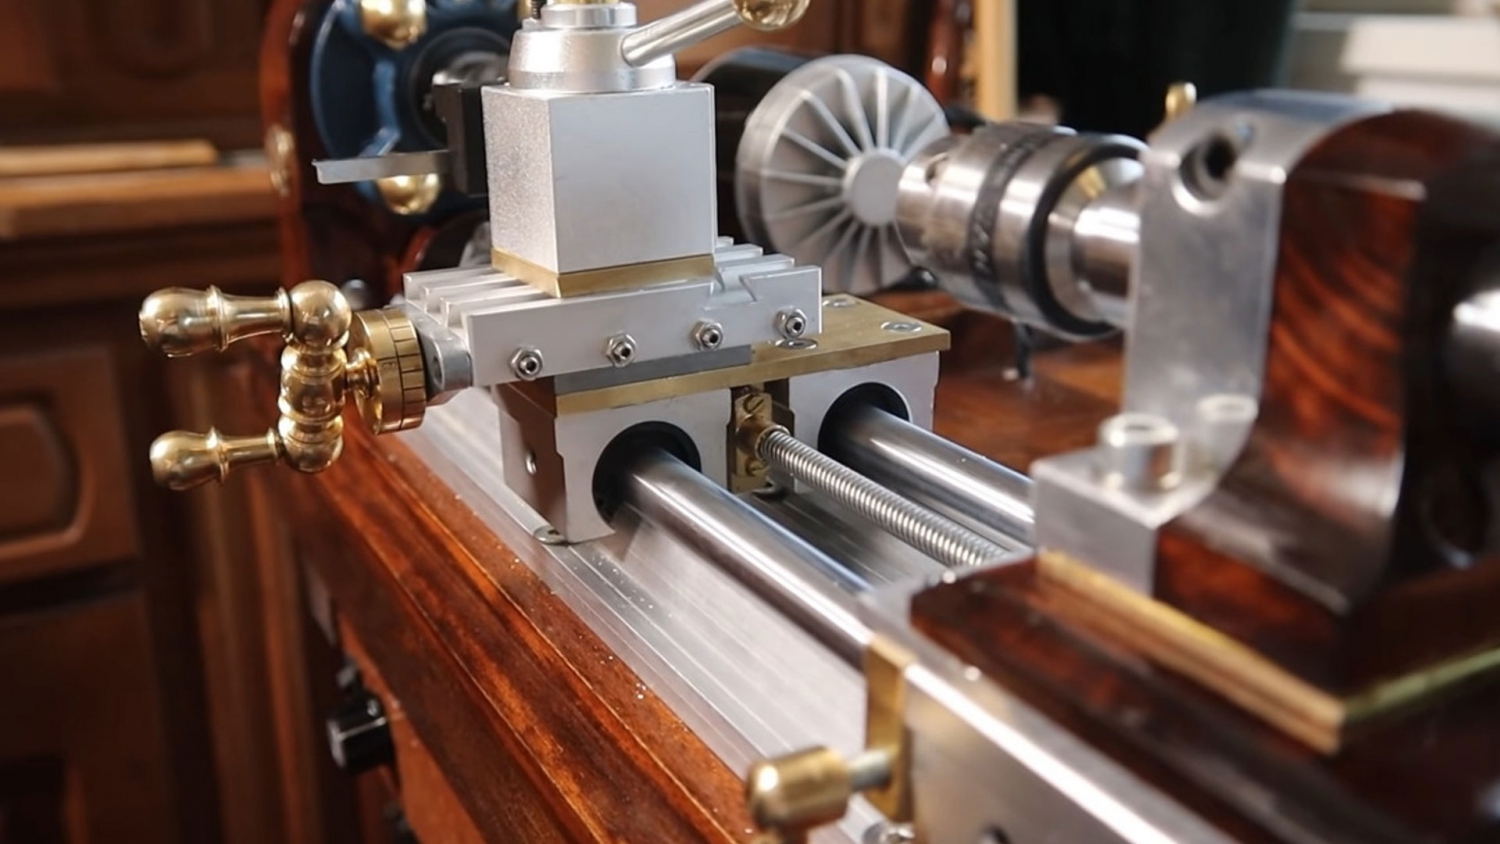 You should know the basics of choose a Lathe